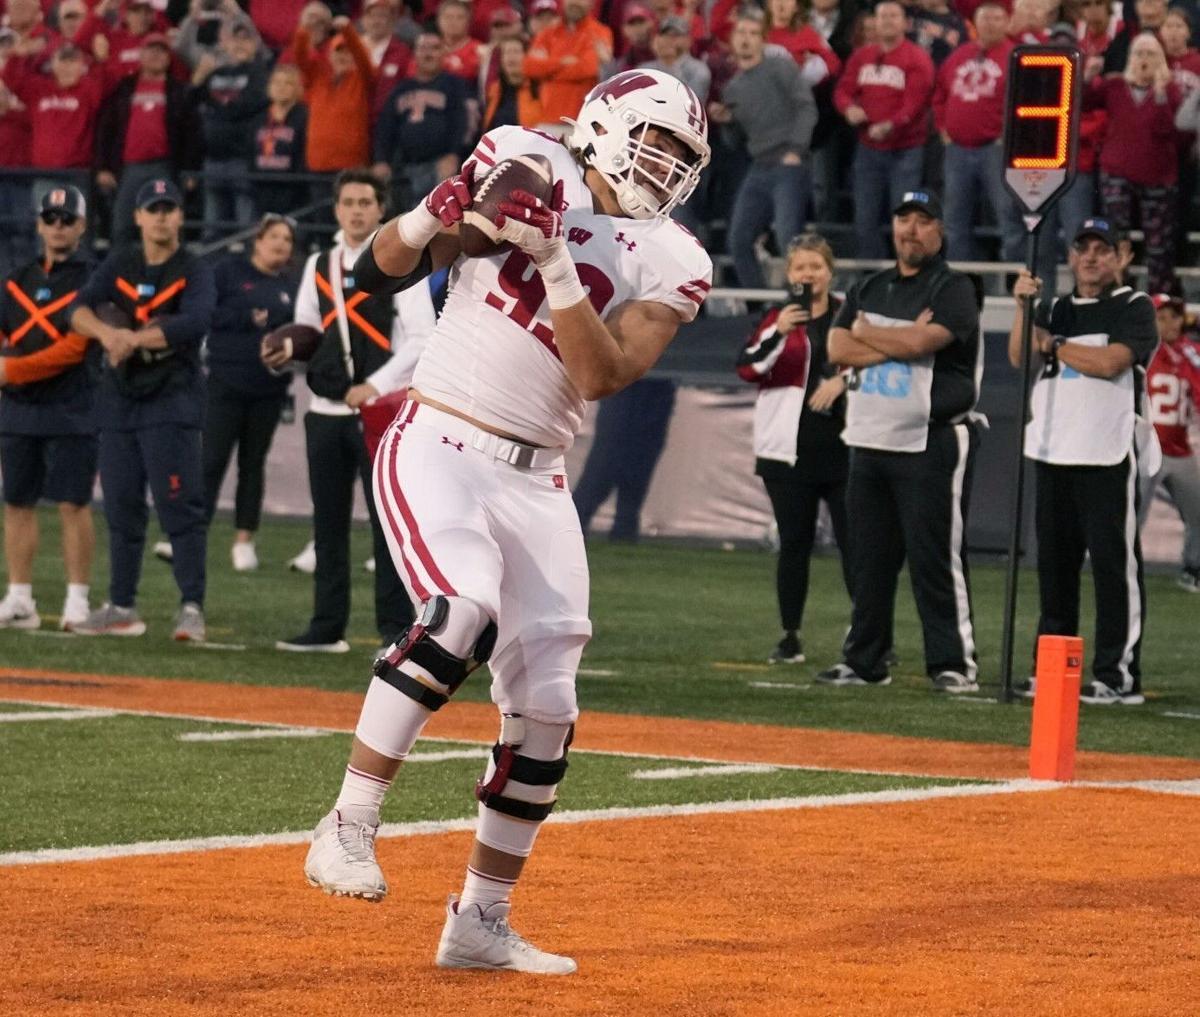 Badgers beat Fighting Illini after 18-point fourth-quarter comeback